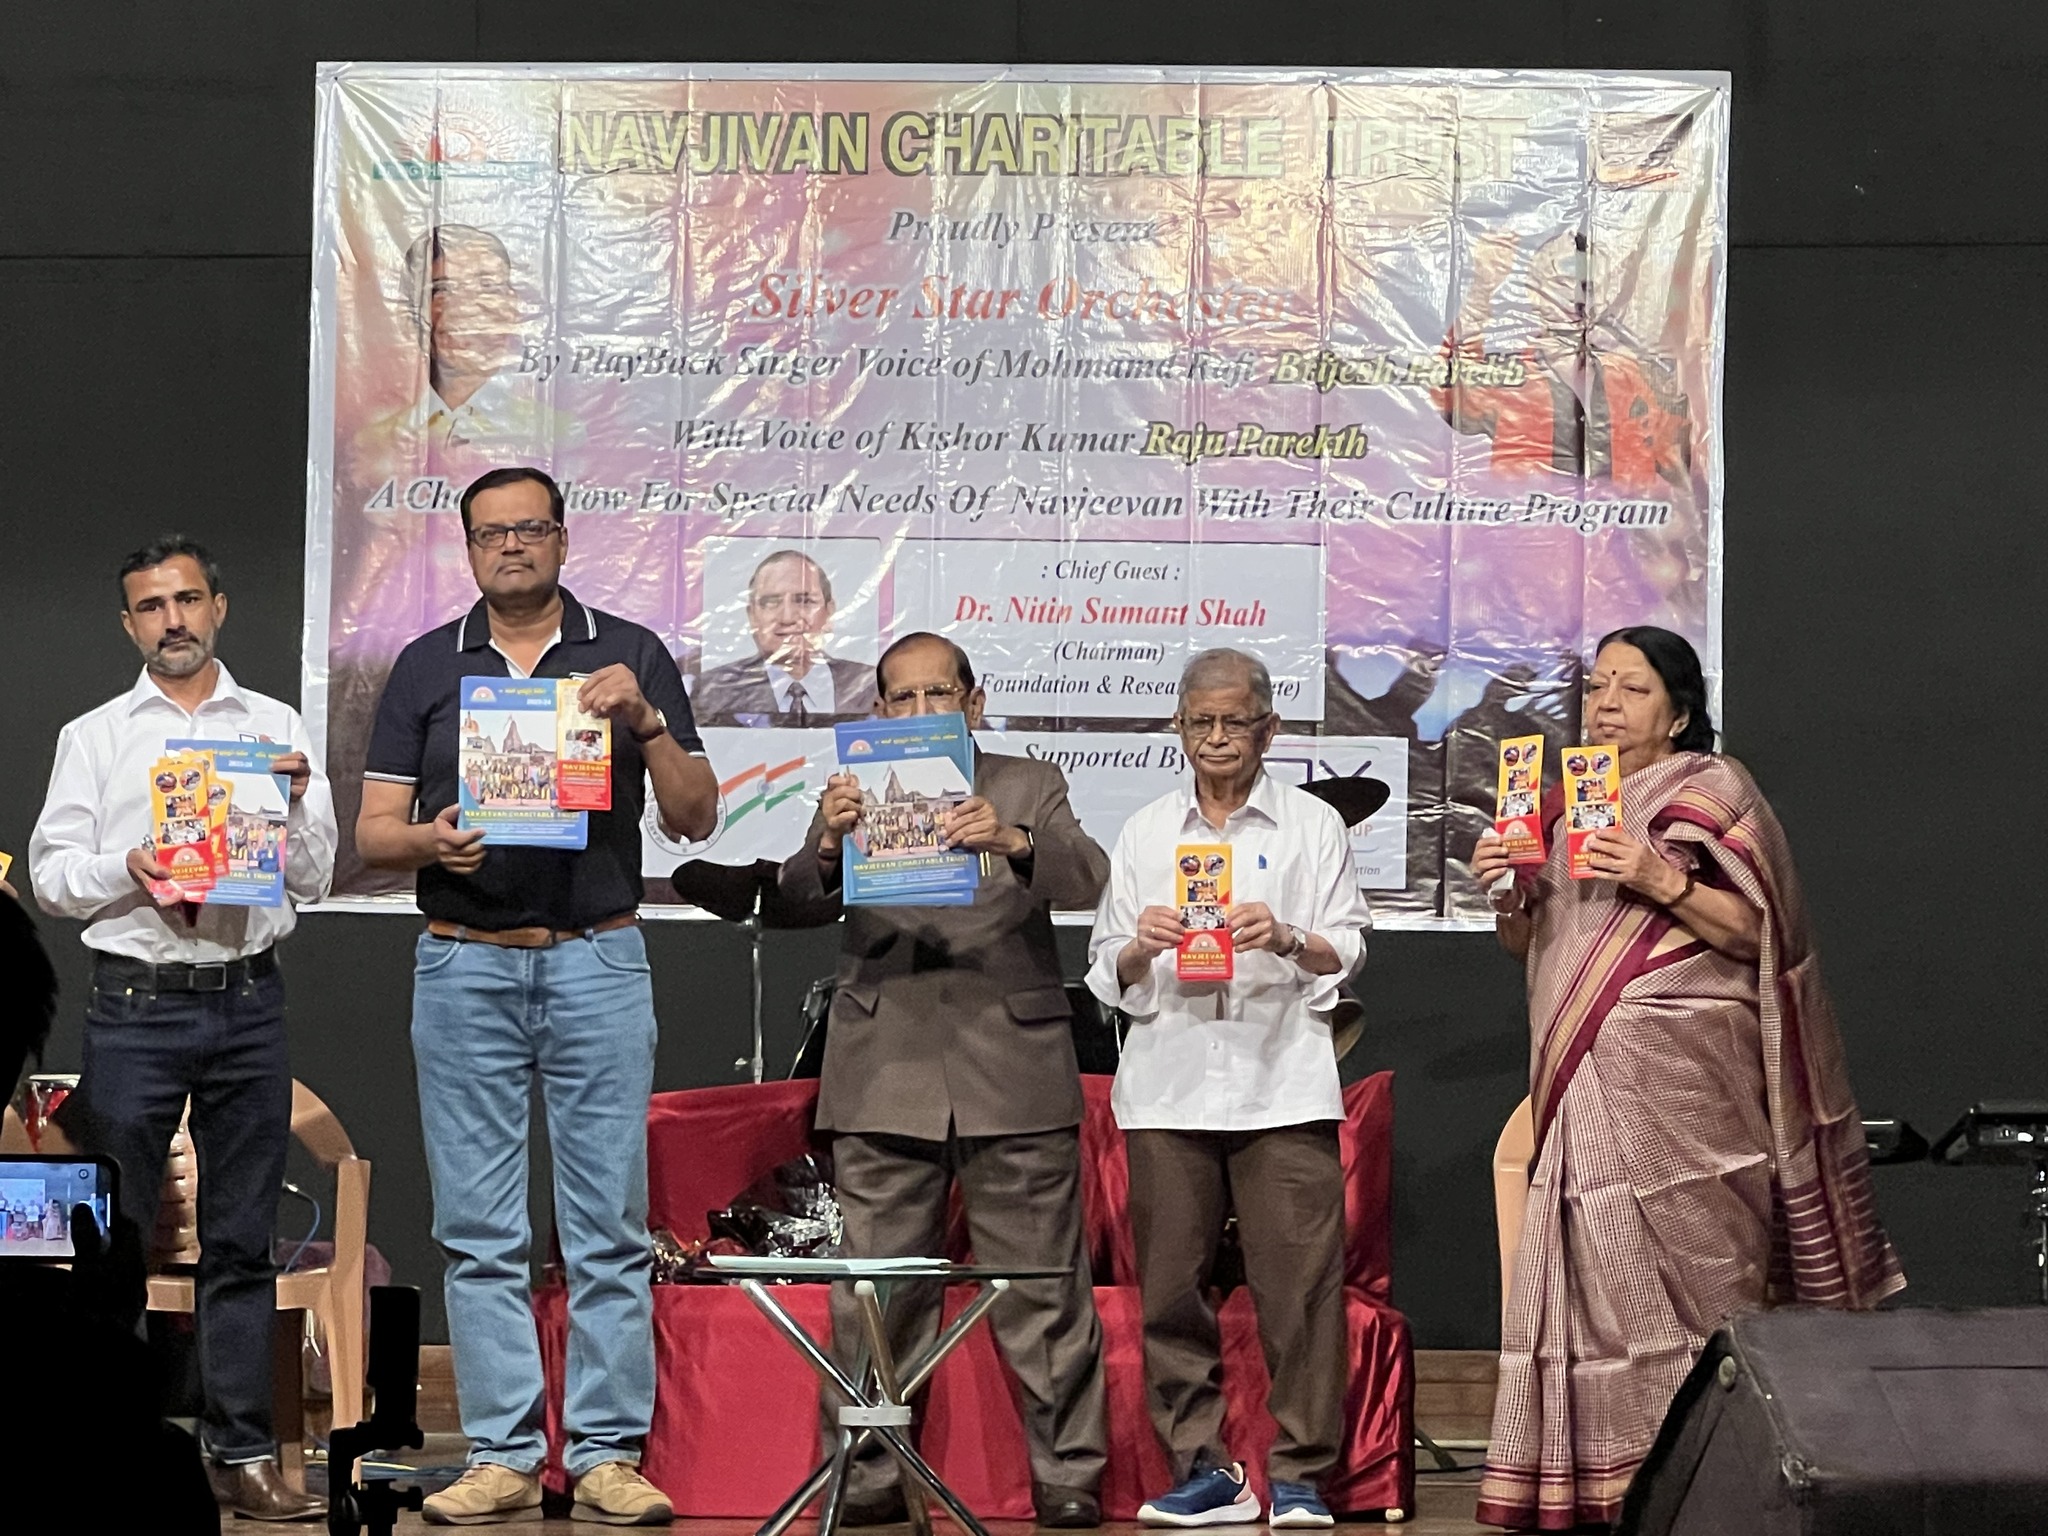 Navjivan Charitable Trust souvenir release and annual report as well as cultural programme